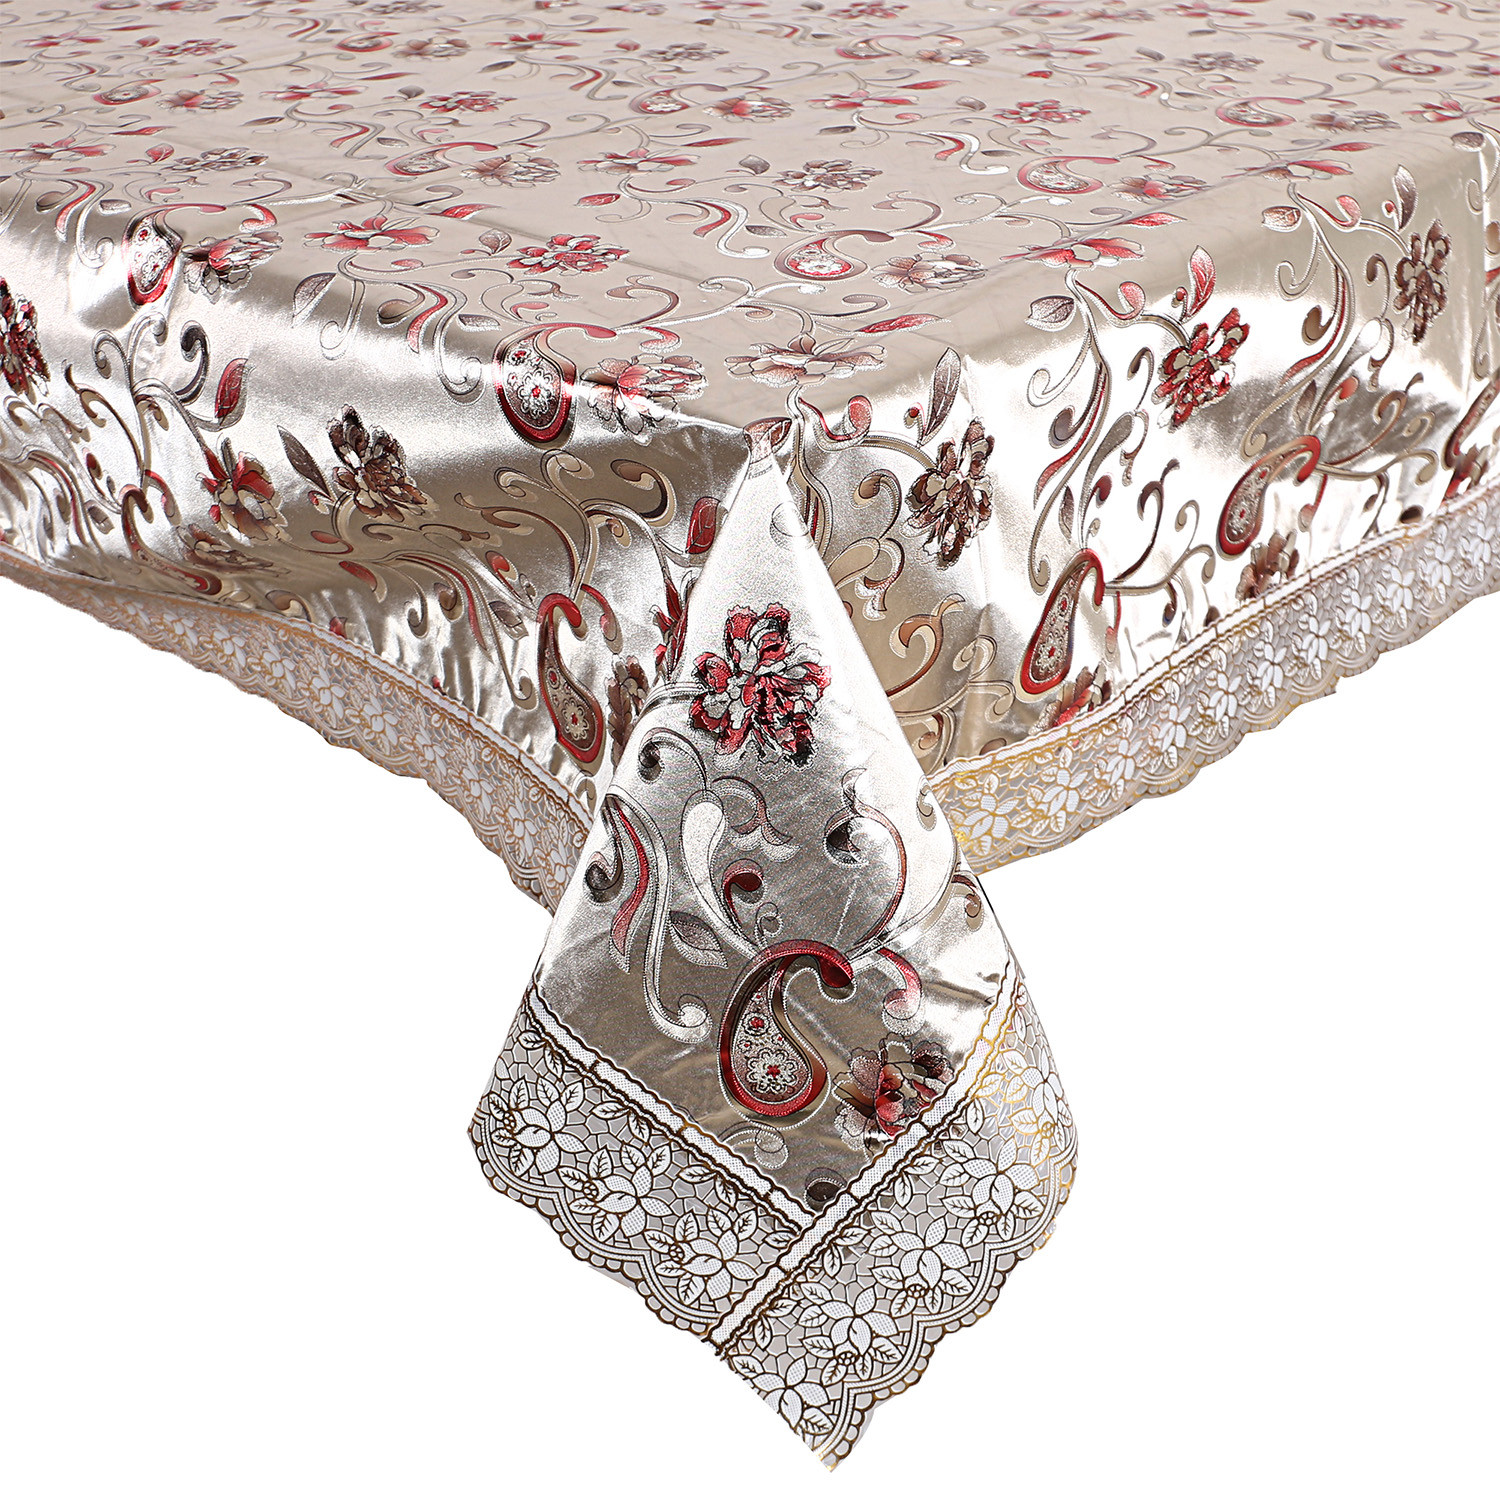 Kuber Industries Dining Table Cover|PVC Spill Proof Paisley Pattern Tablecloth|Kitchen Dinning Protector With Seamless Border, 60X90 Inch (Gold)